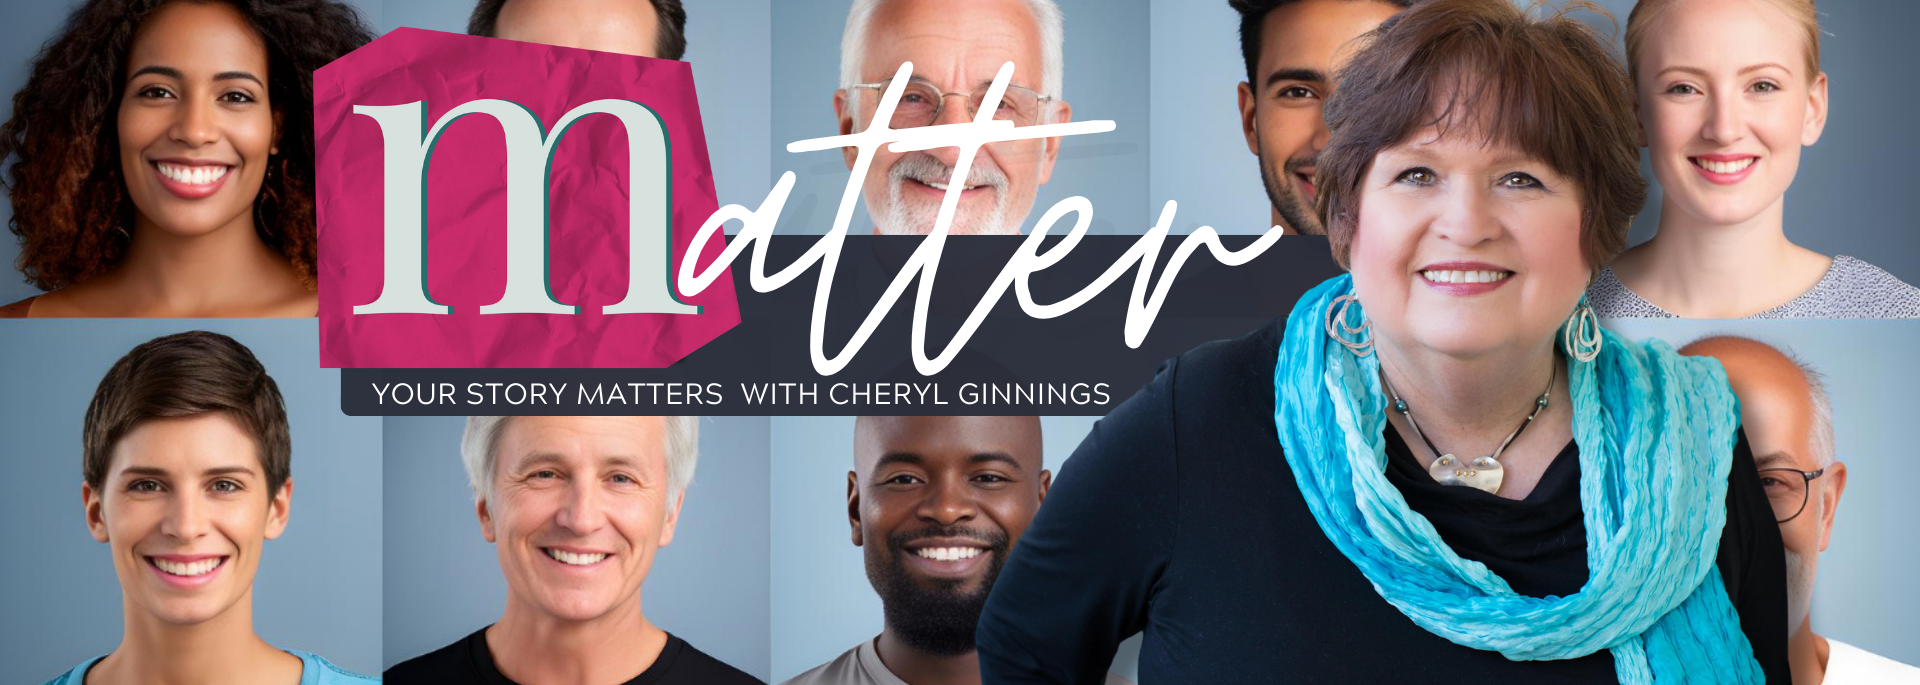 Matter with Cheryl Ginnings channel